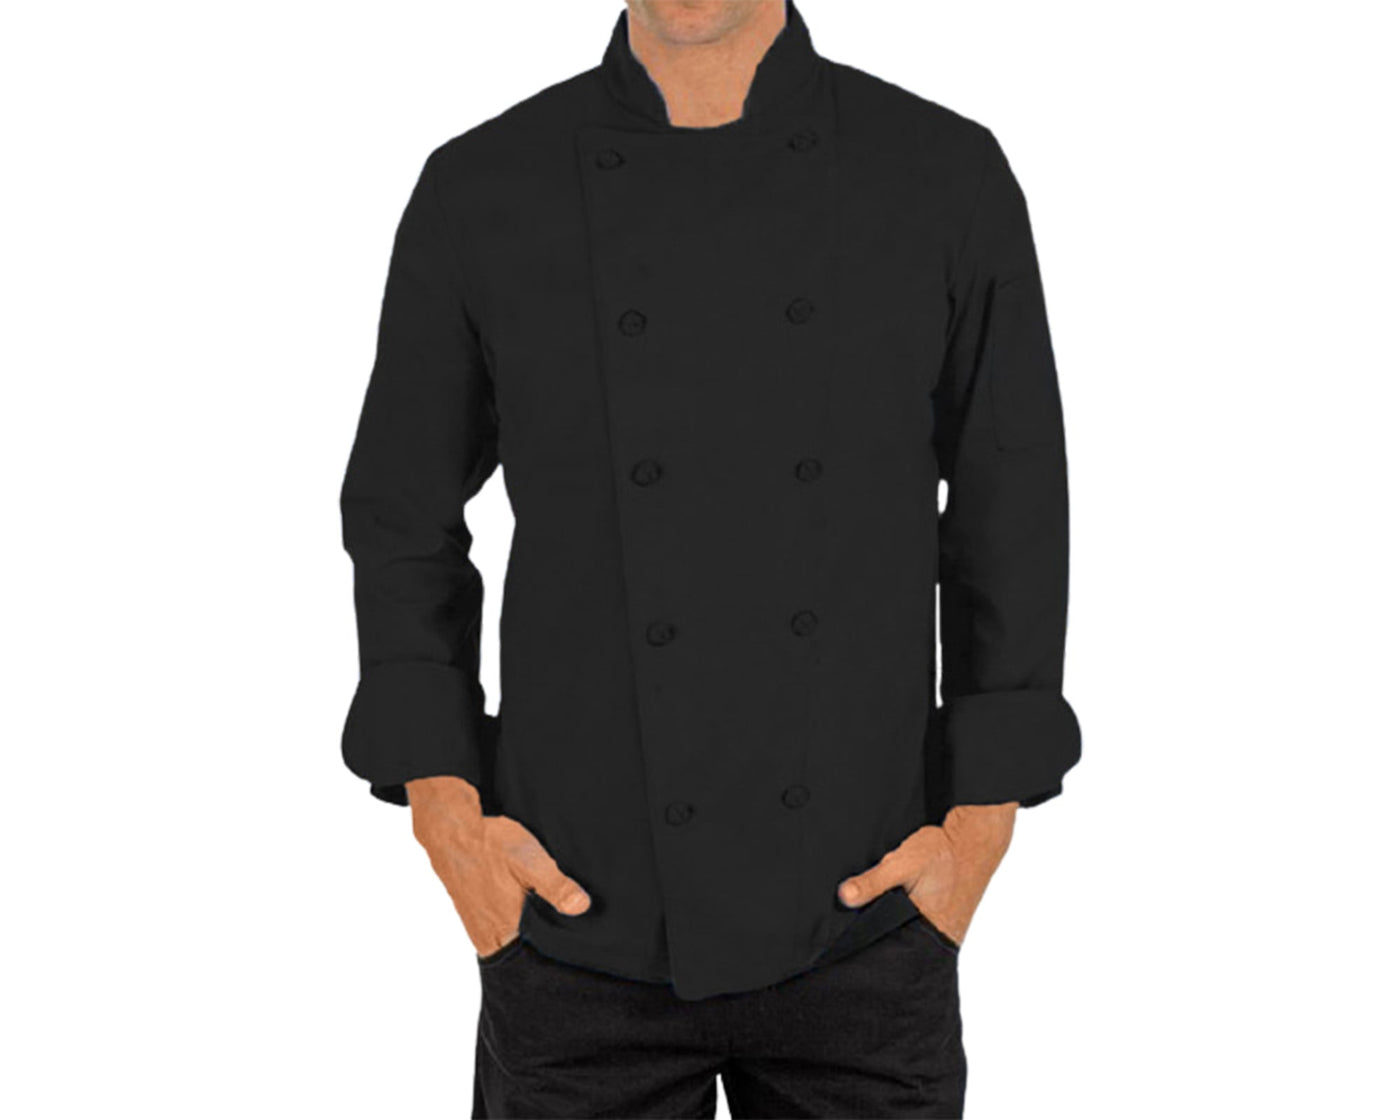 man wearing black chef coat with solid button